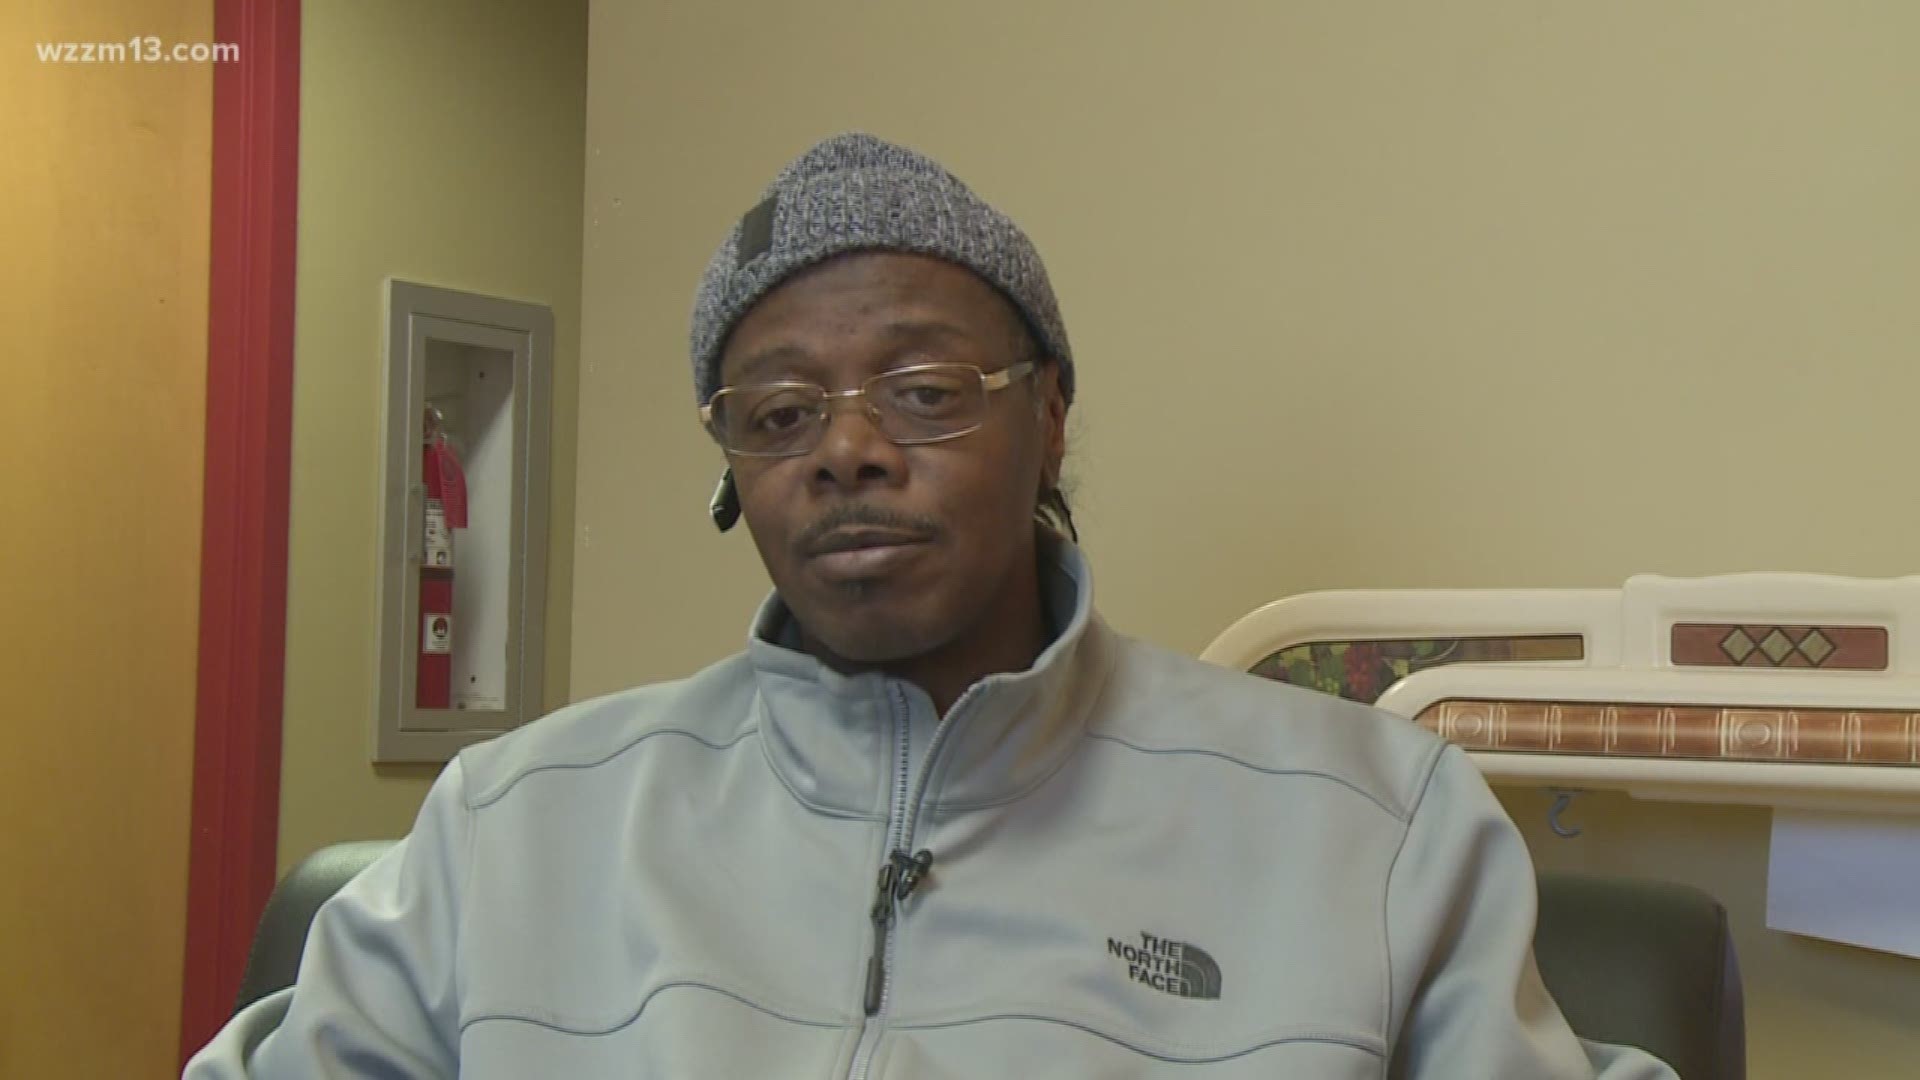 Grand Rapids man celebrates 15 years out of prison